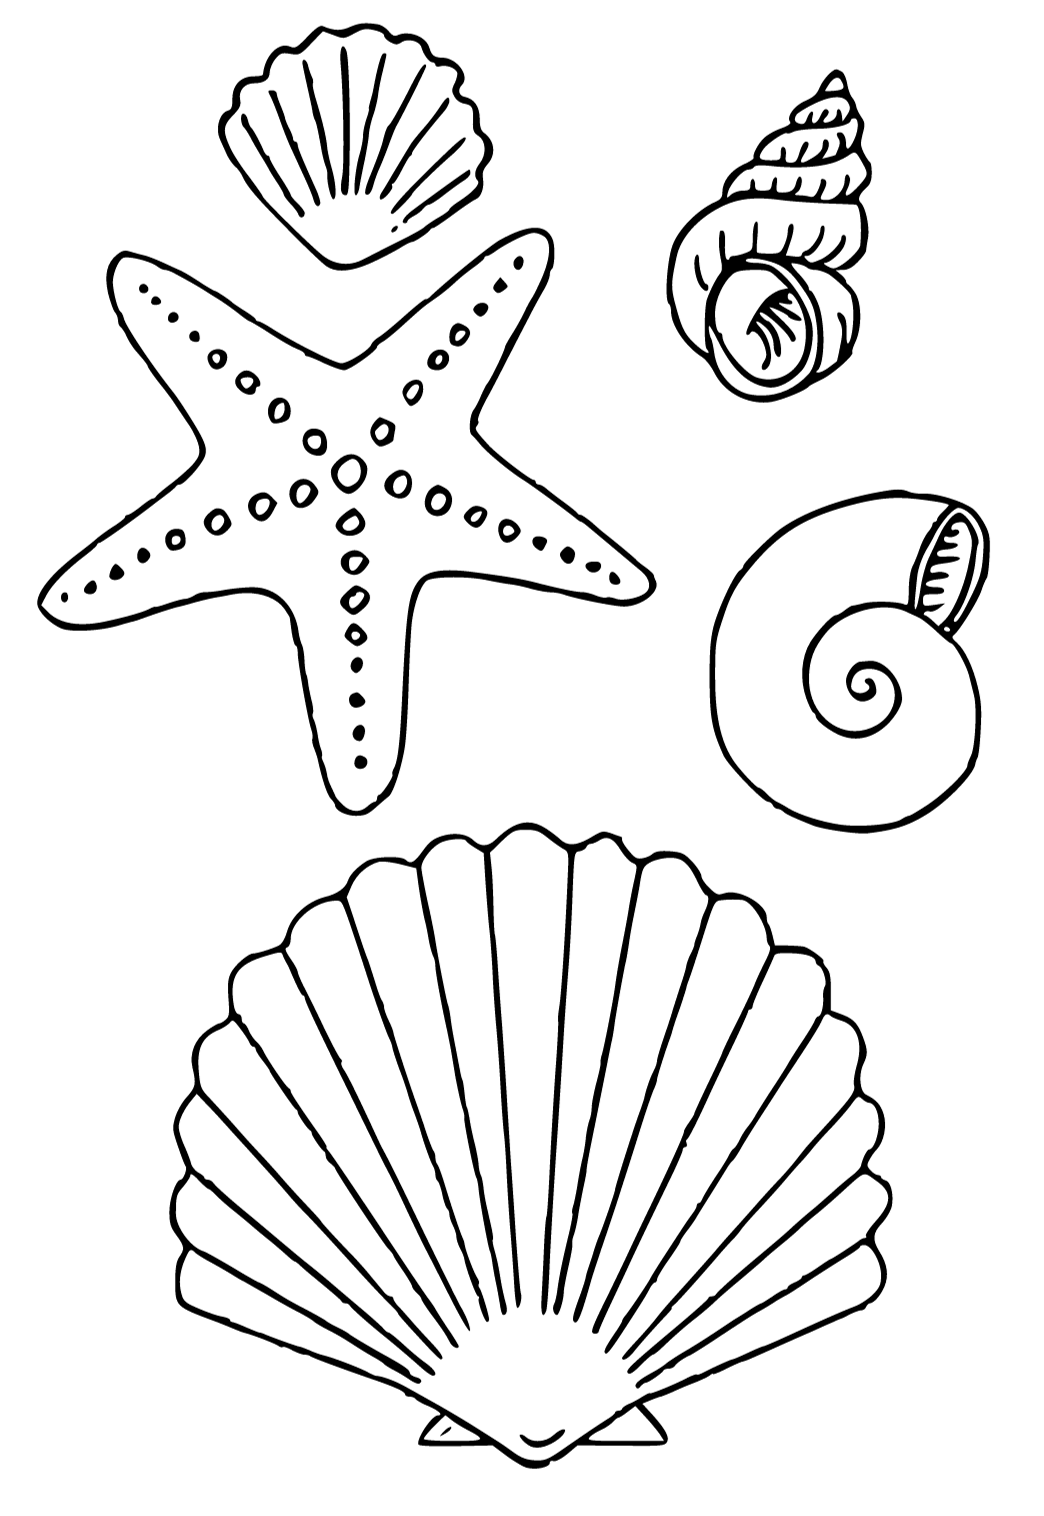 Free printable seashell various coloring page for adults and kids